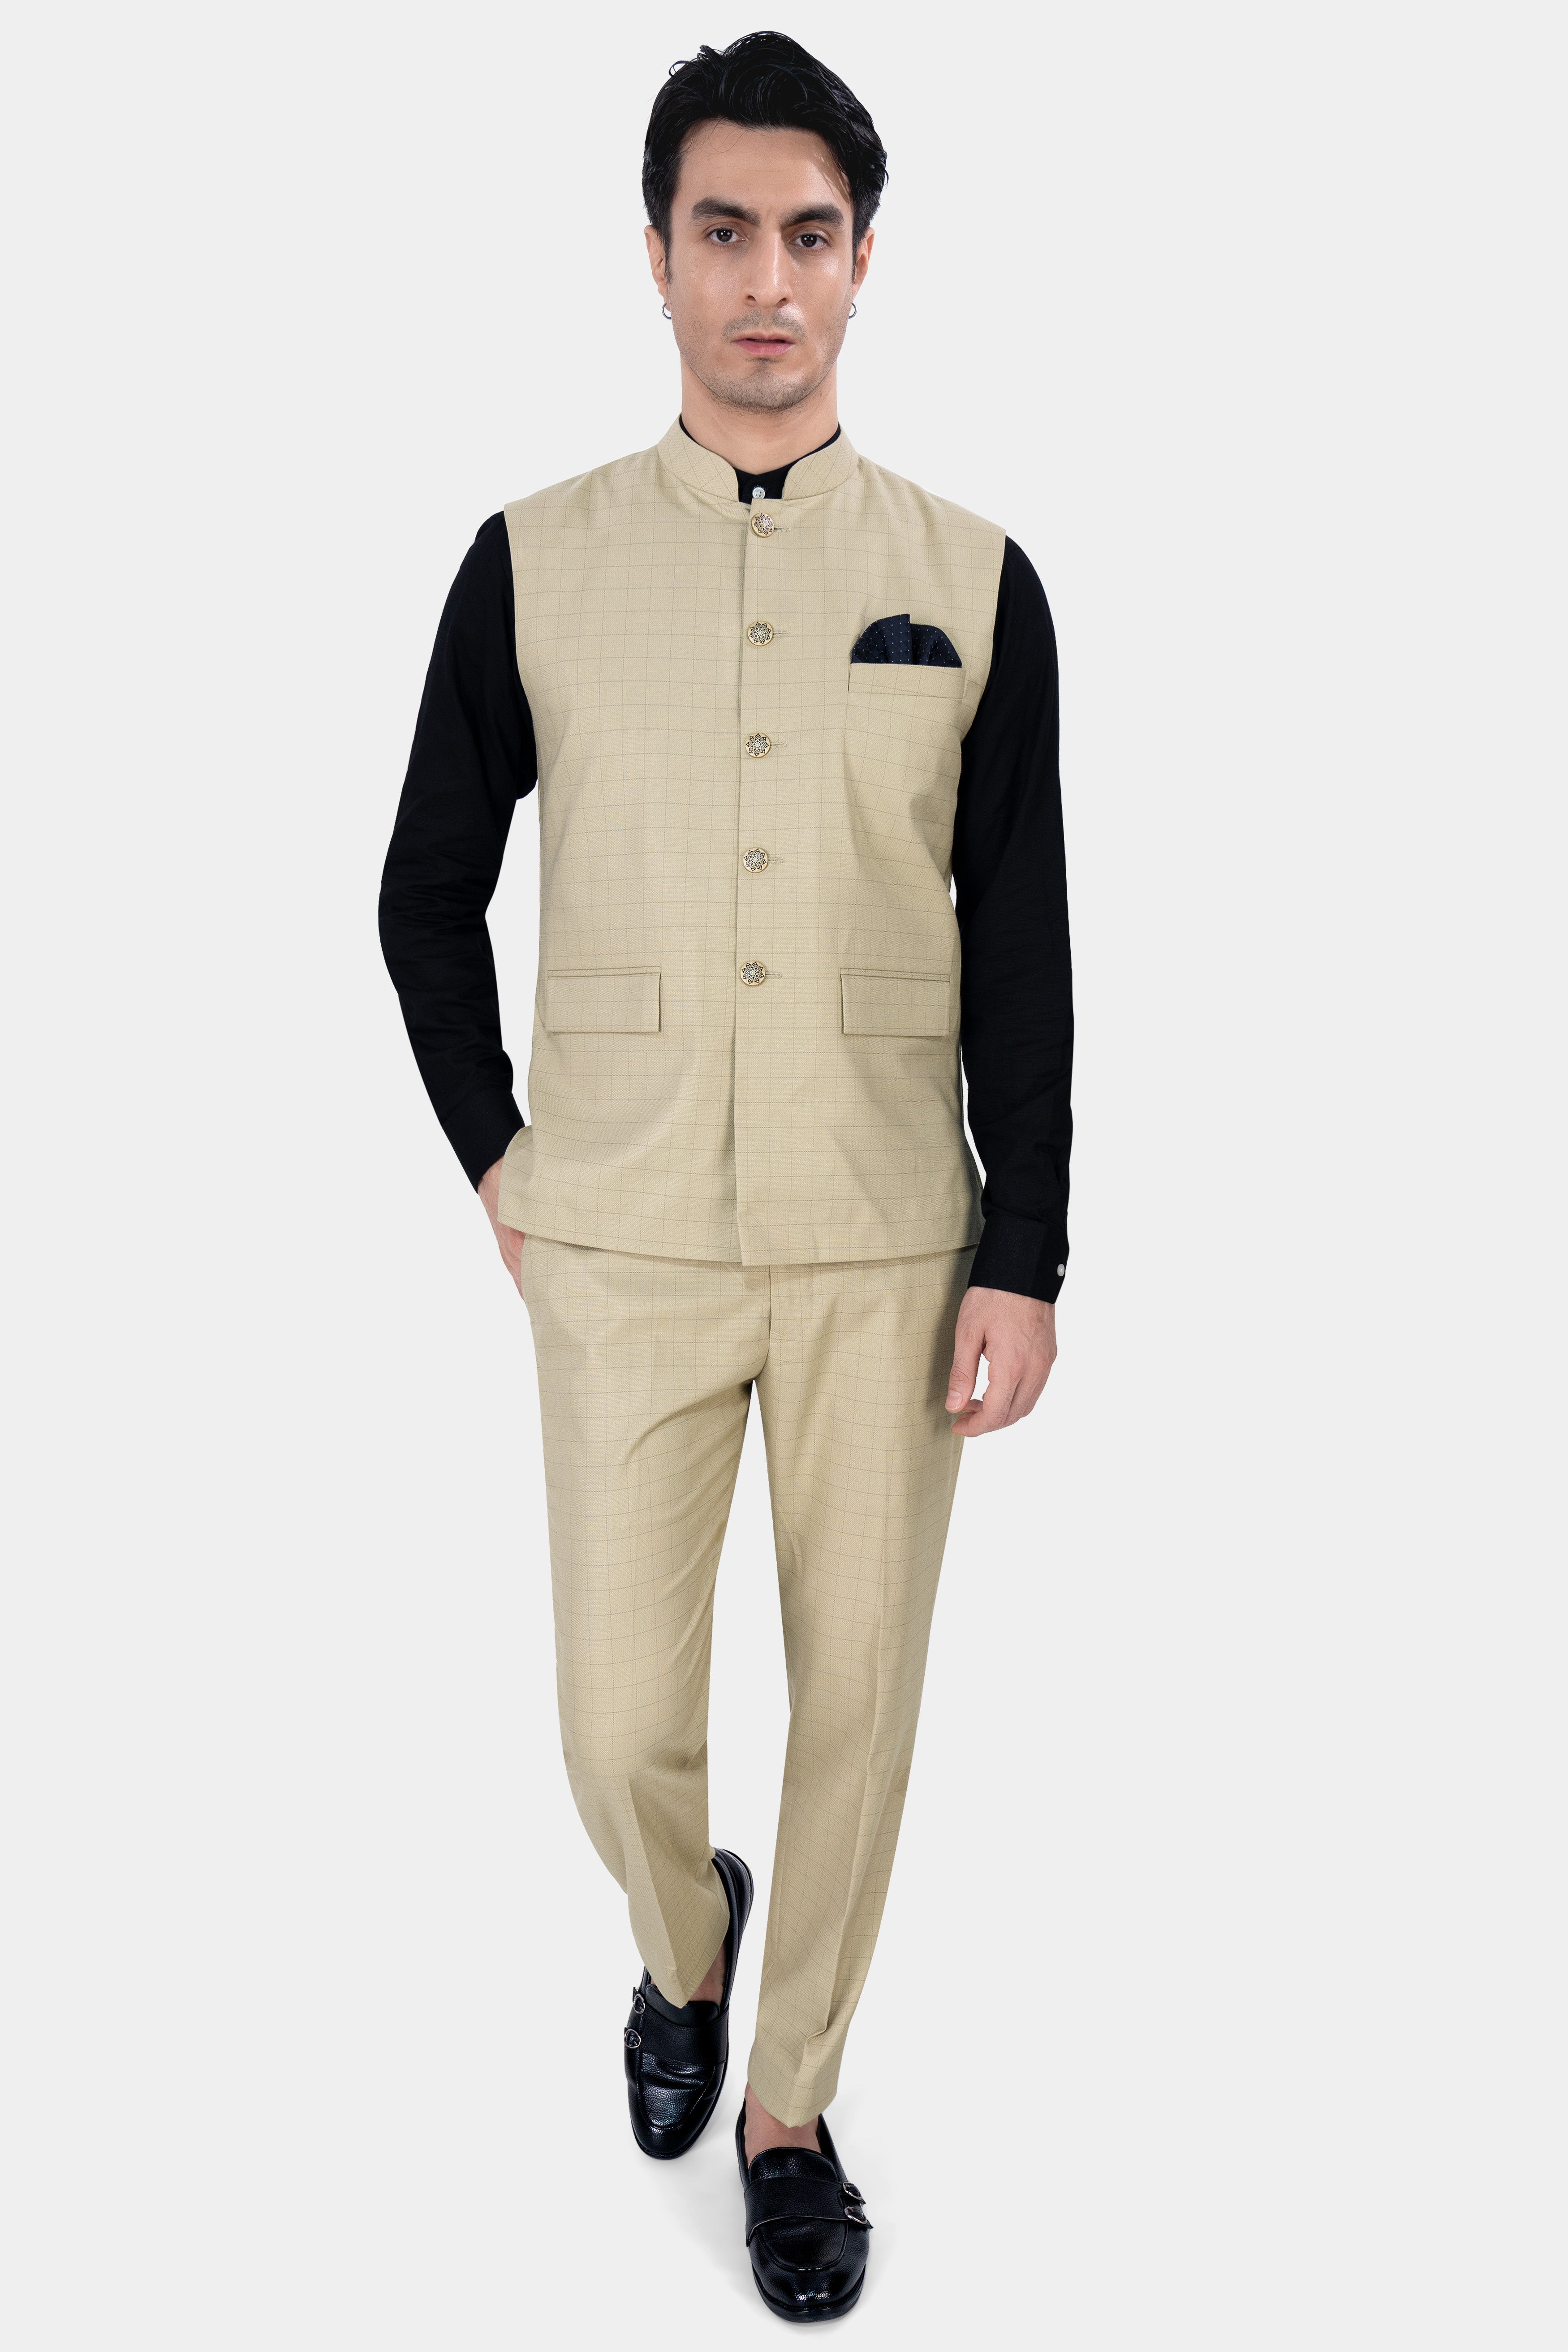 Pavlova Brown with Taupe Brown Checkered Dobby Wool Rich Nehru Jacket WC2878-36, WC2878-38, WC2878-40, WC2878-42, WC2878-44, WC2878-46, WC2878-48, WC2878-50, WC2878-52, WC2878-54, WC2878-56, WC2878-58, WC2878-60